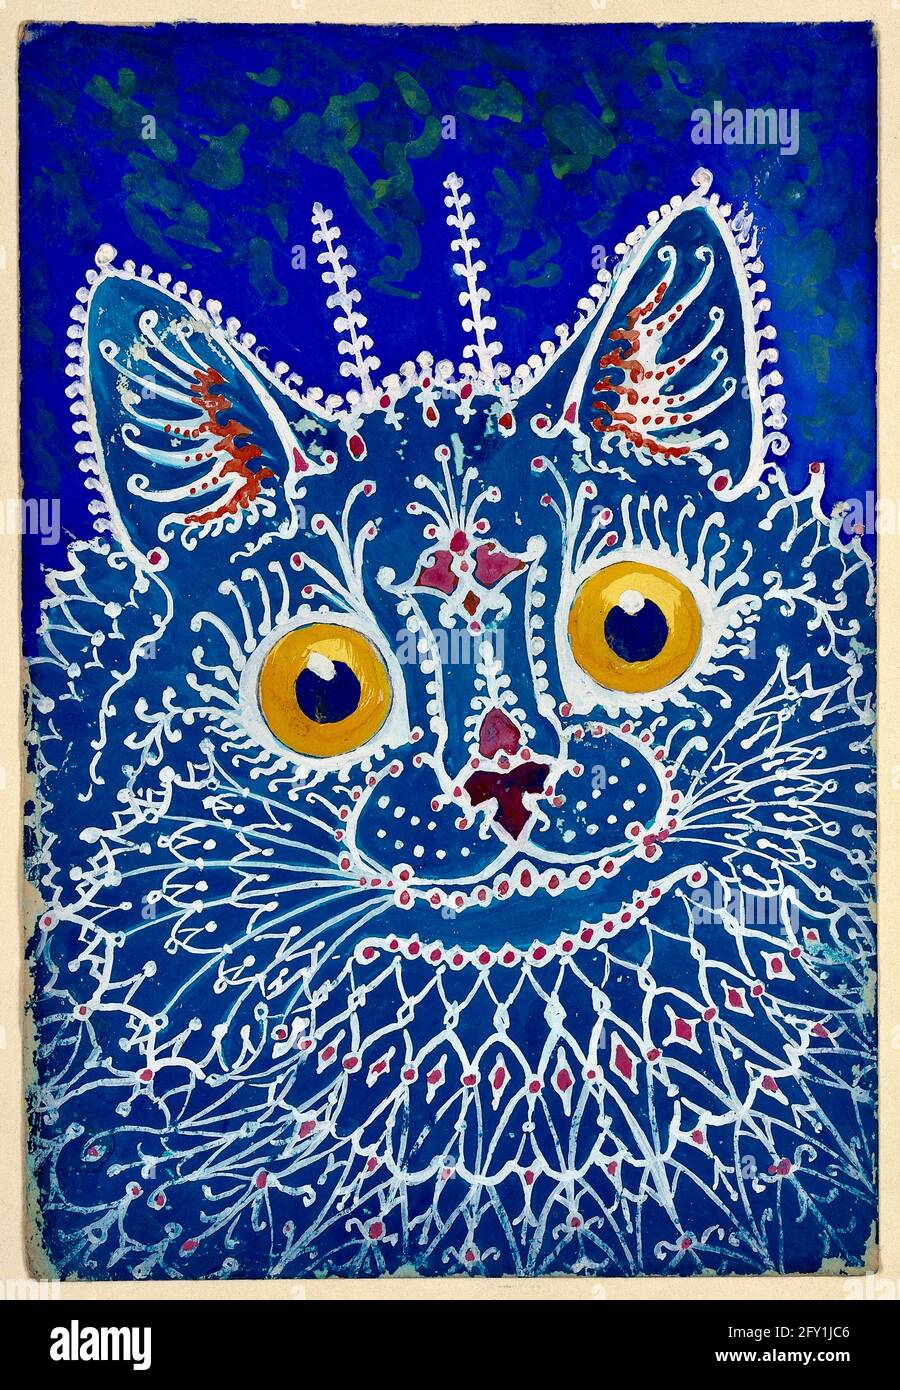 Louis Wain - Electric Blue cat with yellow eyes - purr-fect Stock Photo